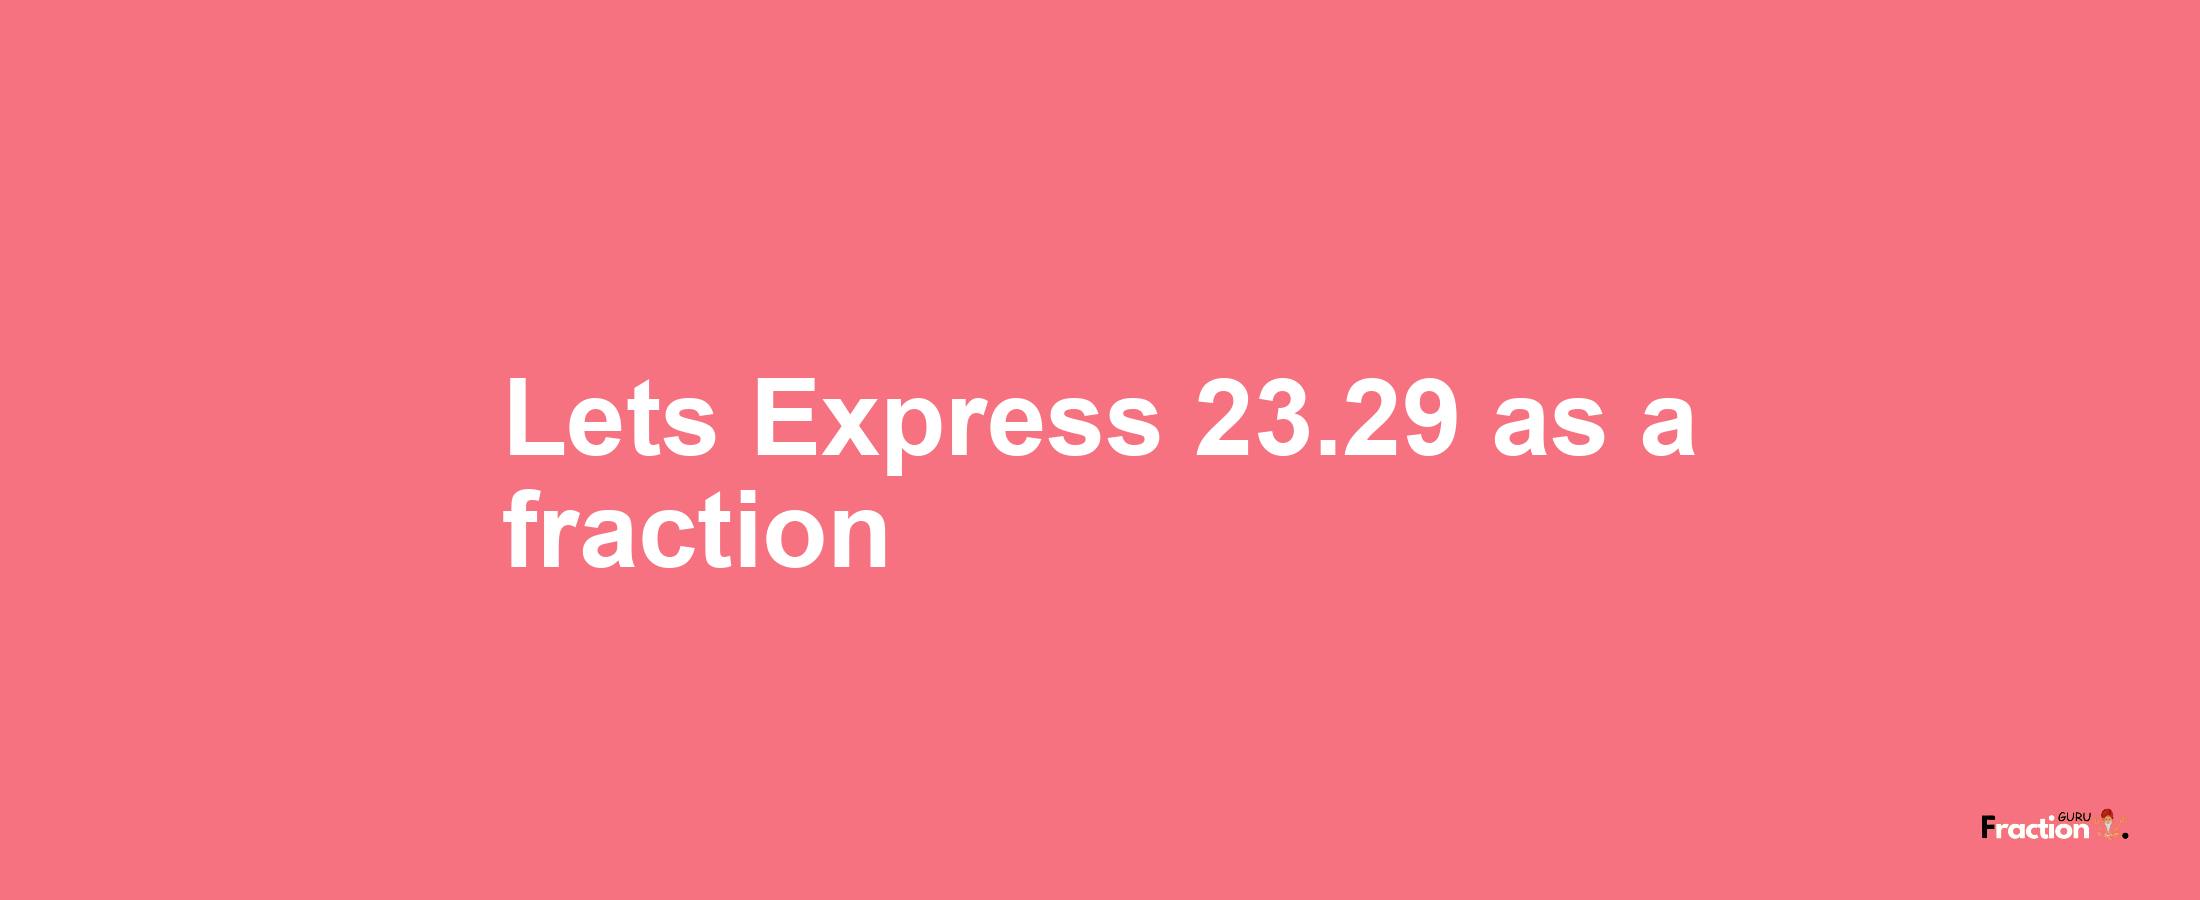 Lets Express 23.29 as afraction